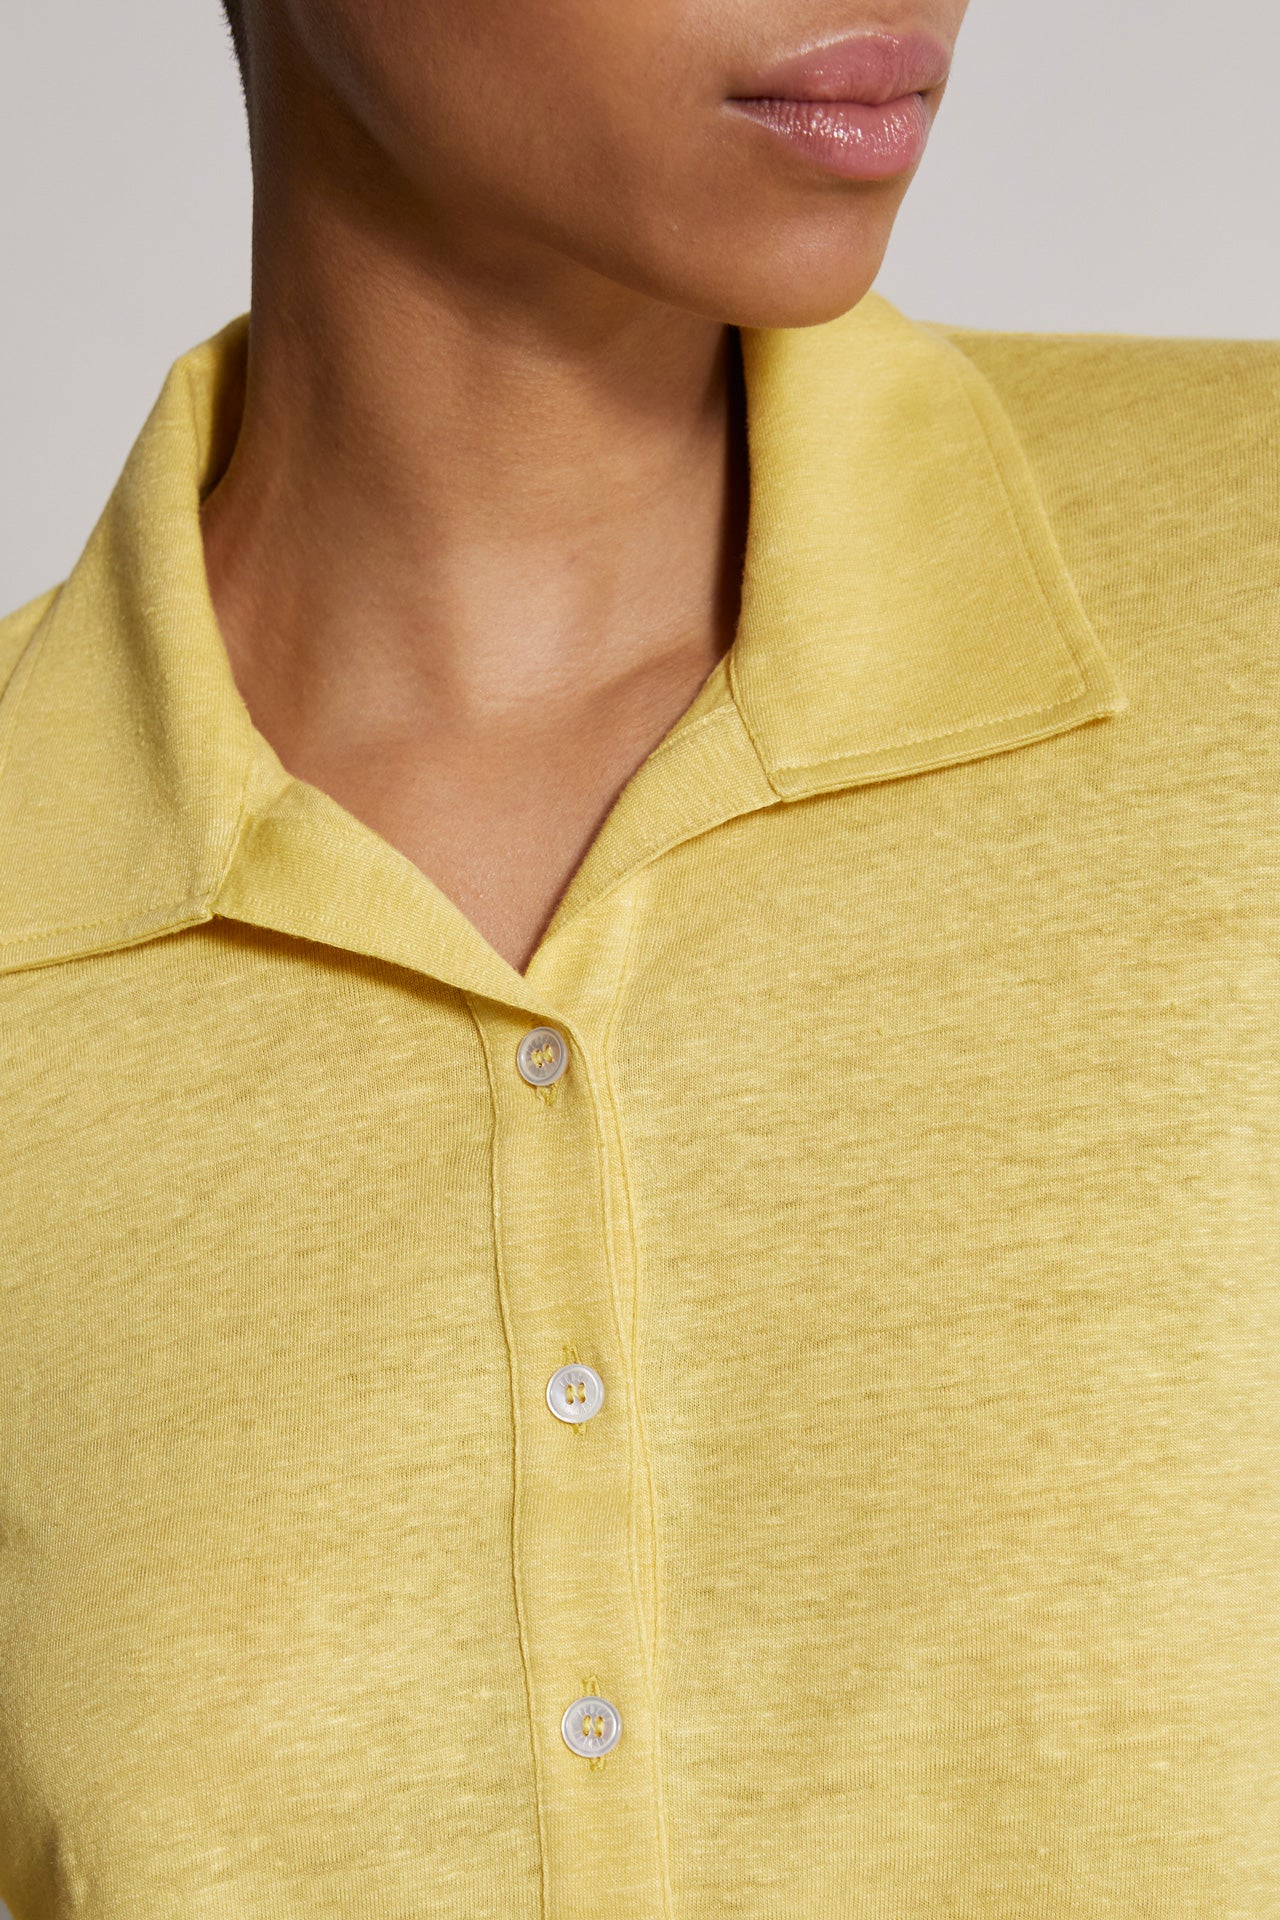 Soft and elegant linen polo shirt in yellow - neck detail